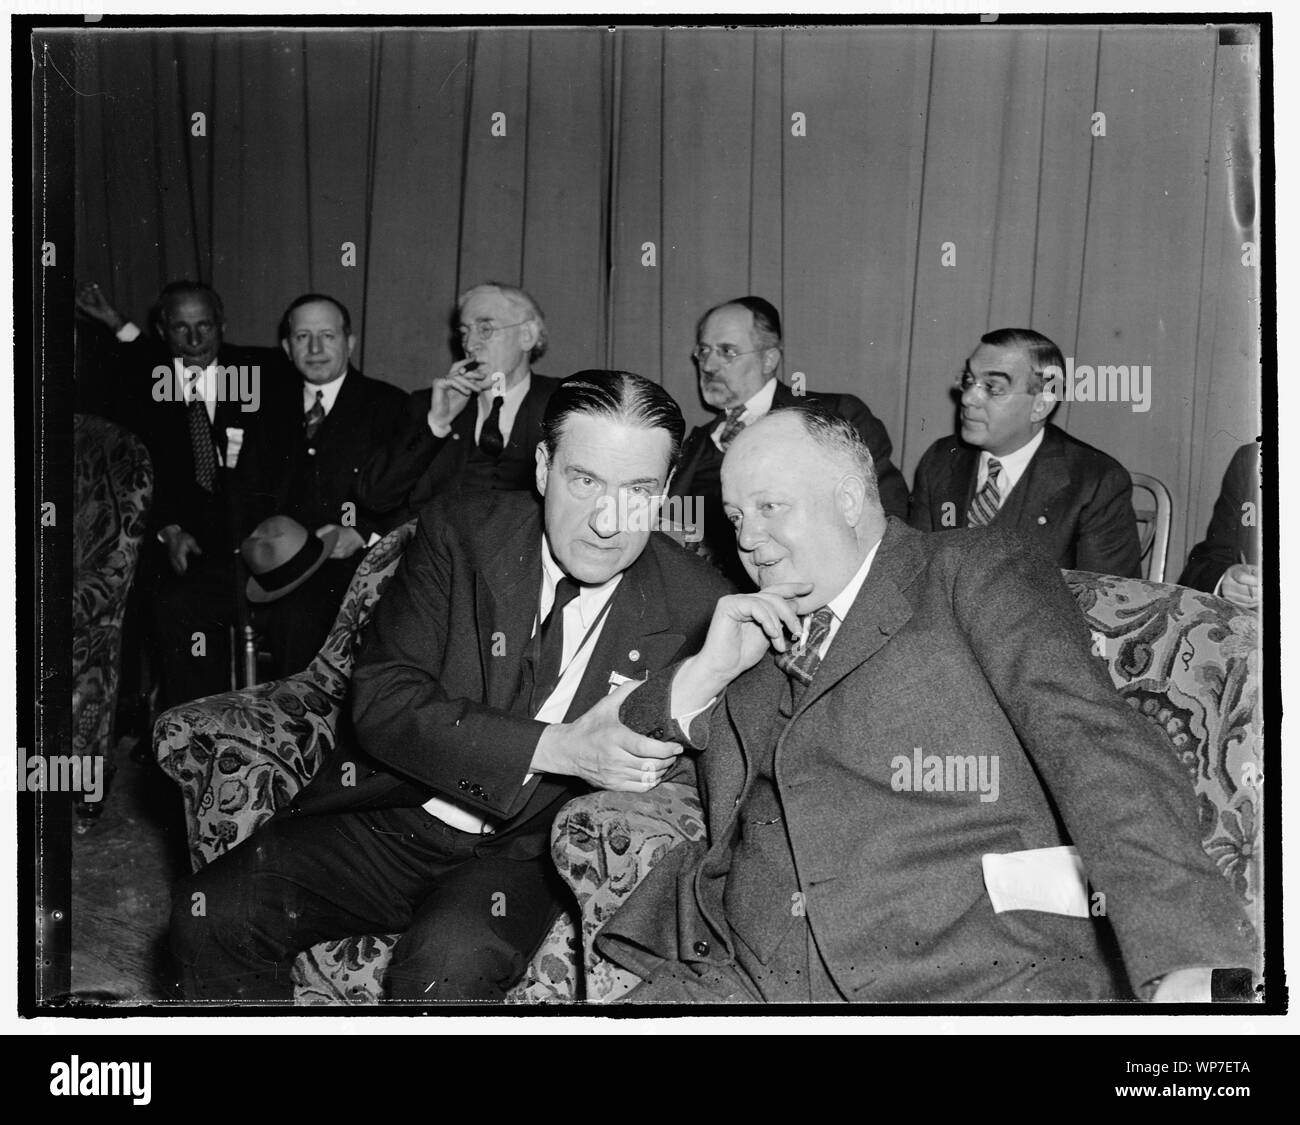 Leaders at Jewish congress. Washington, D.C., Nov. 29. Dr. Stephan S. Wise, (left) Rabbi of the Free Synagogue of New York City, and President of the American Jewish Congress being held locally at the Willard Hotel, snapped at yesterday's meeting with Dr. Harry A. Atkinson, Christian minister of Washington. In an address delivered to the Congress yesterday afternoon, Dr. Atkinson outlined a program for Jews and all others to combat anti-Semitism. Stock Photo